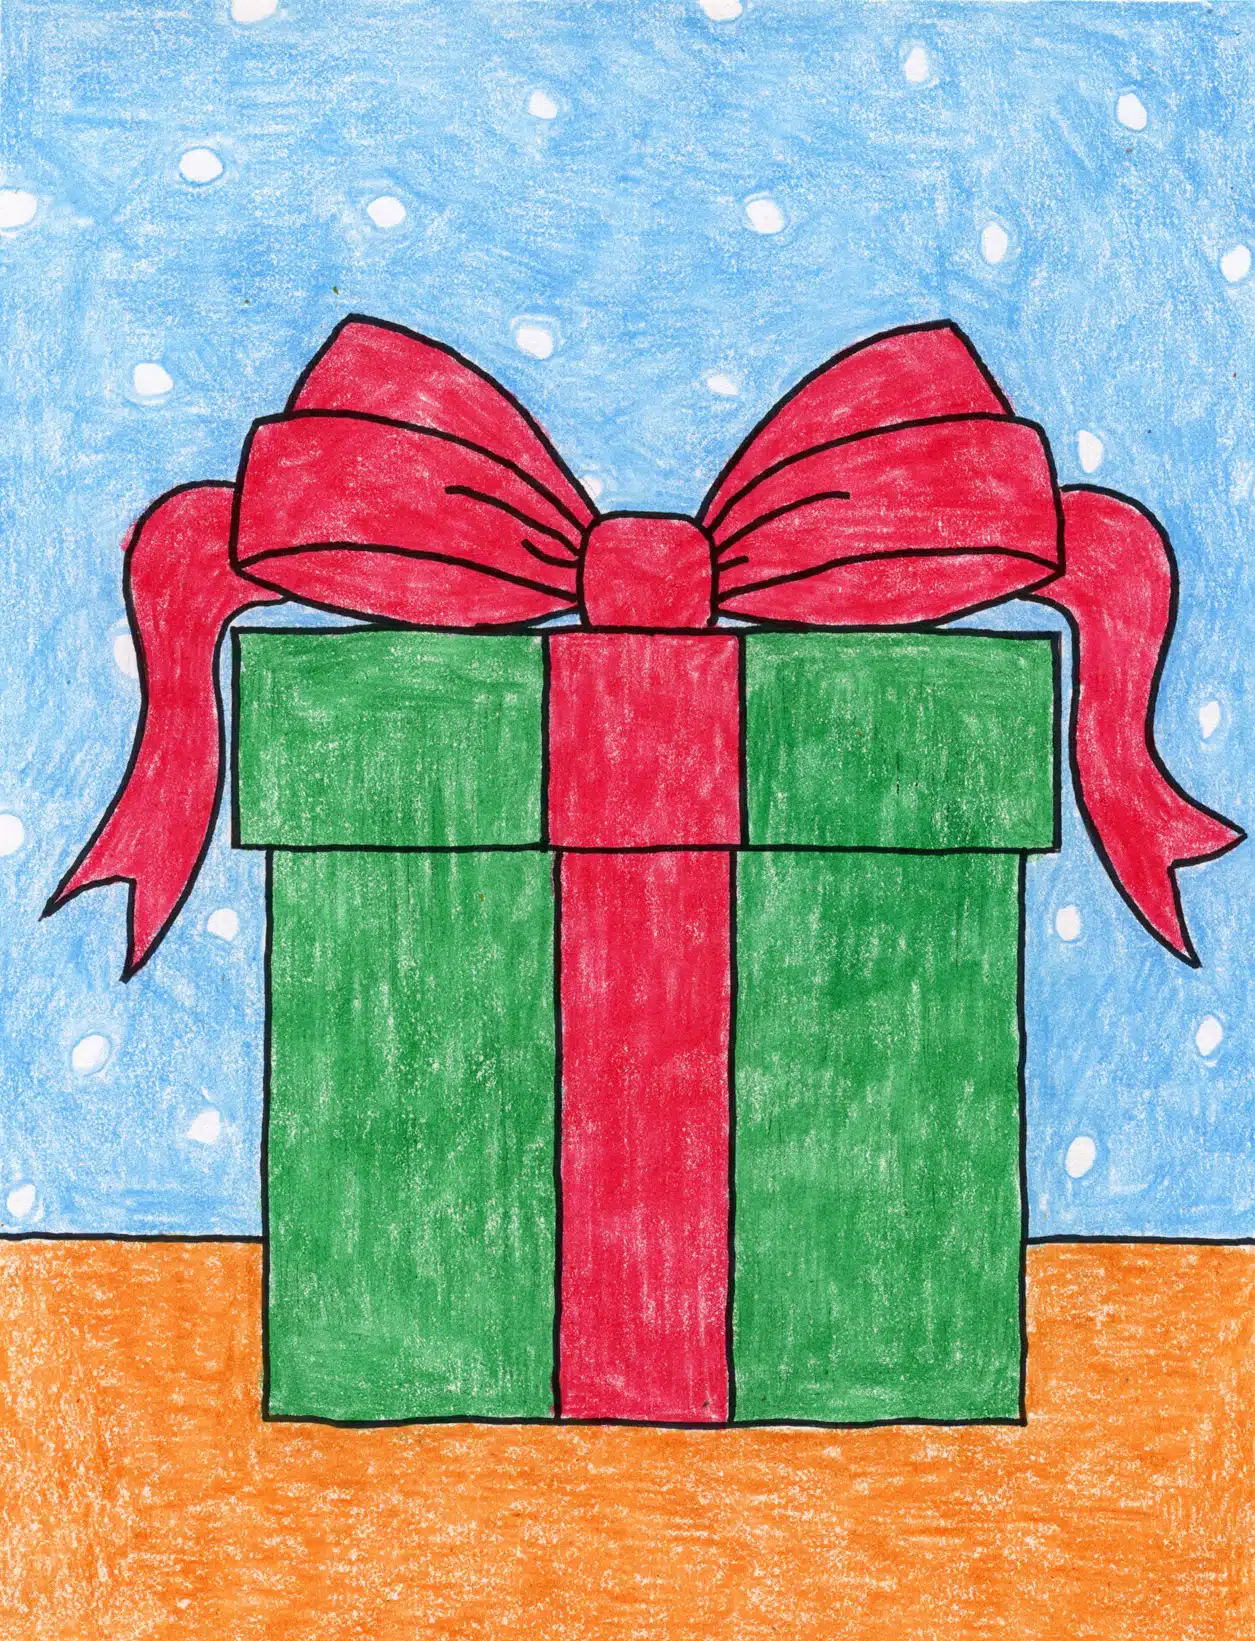 Easy How to Draw a Present Tutorial Video and Present Coloring Page